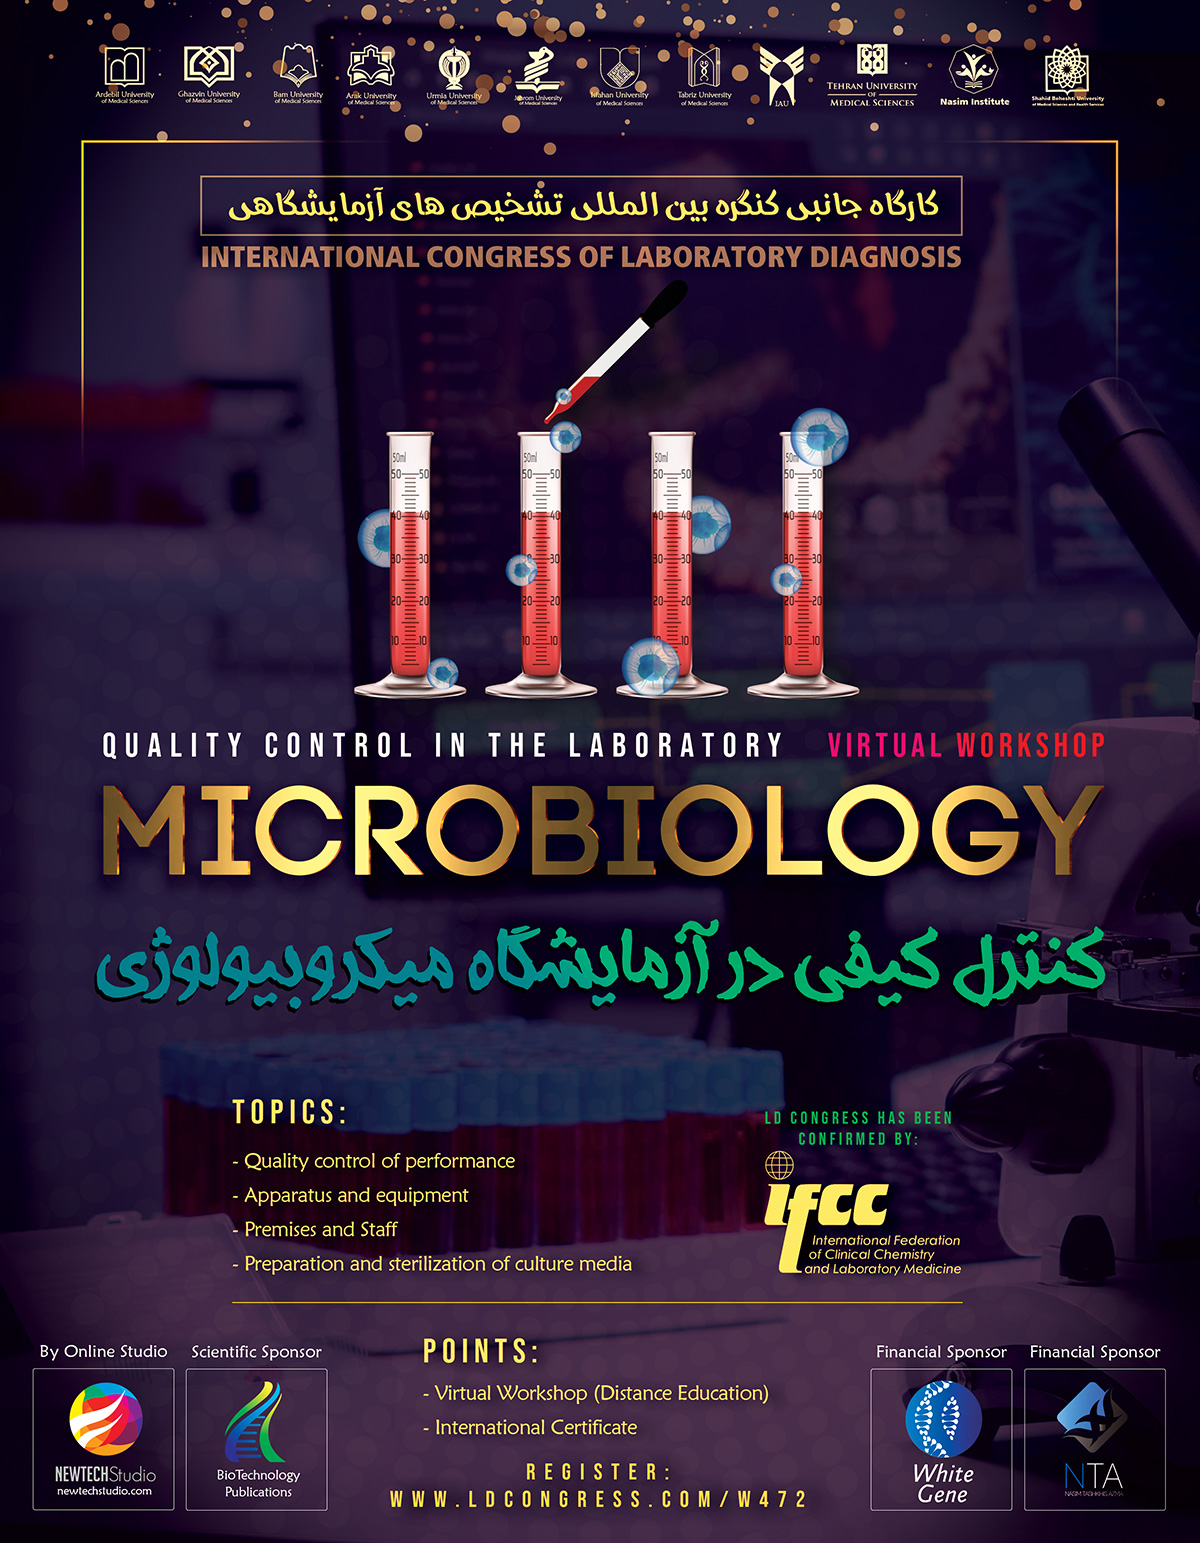 Microbiology quality control in the microbiology laboratories